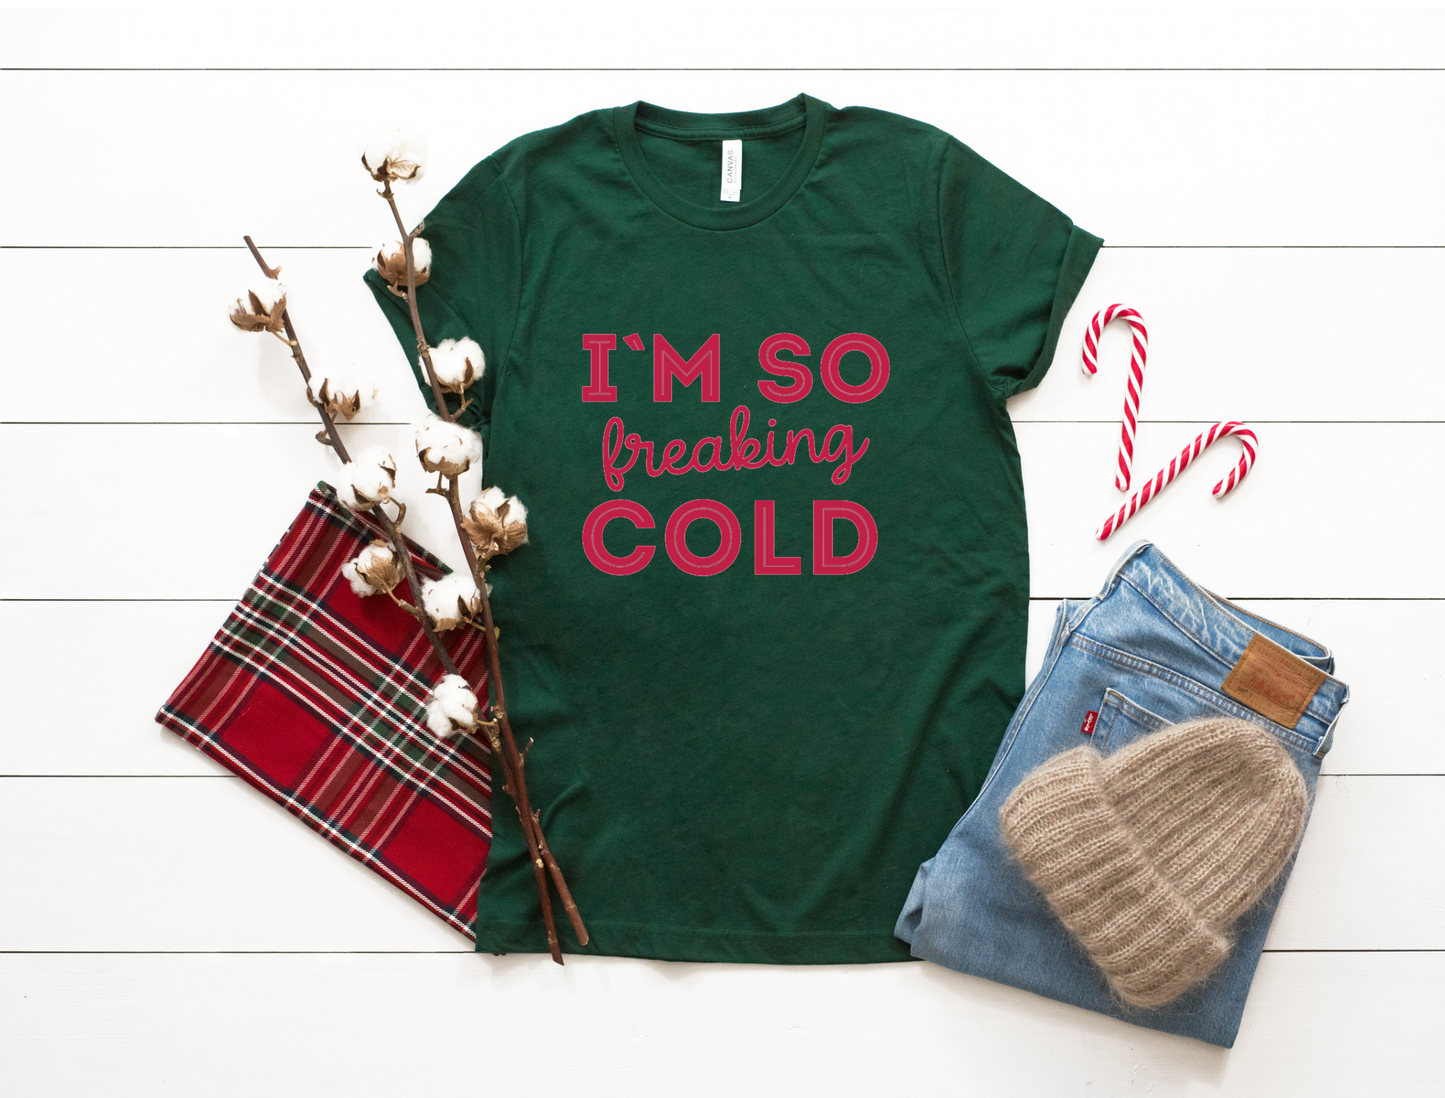 "I'm so freaking cold" Tee